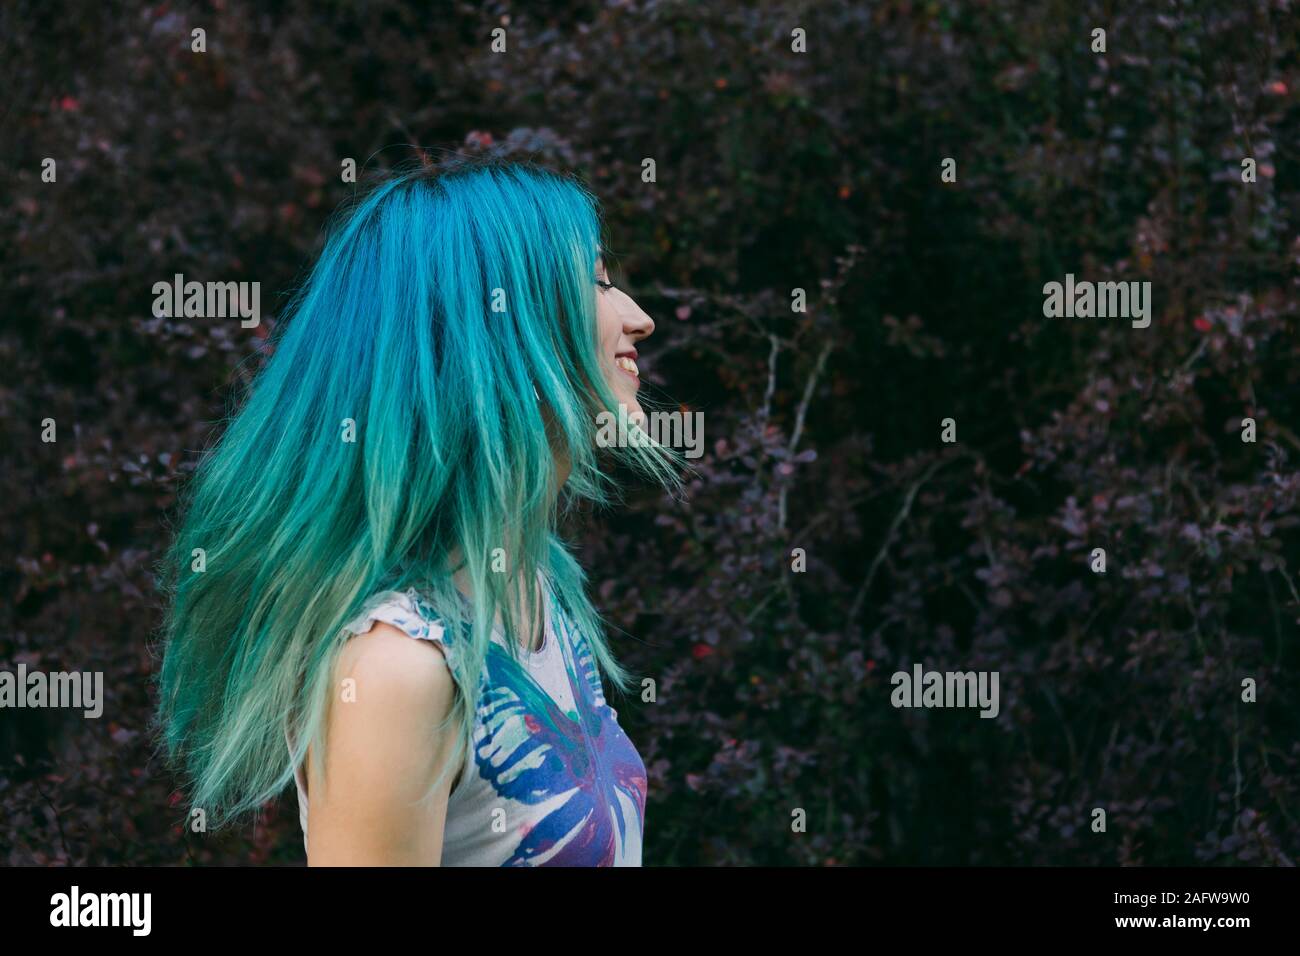 Profile carefree young woman with blue hair Stock Photo